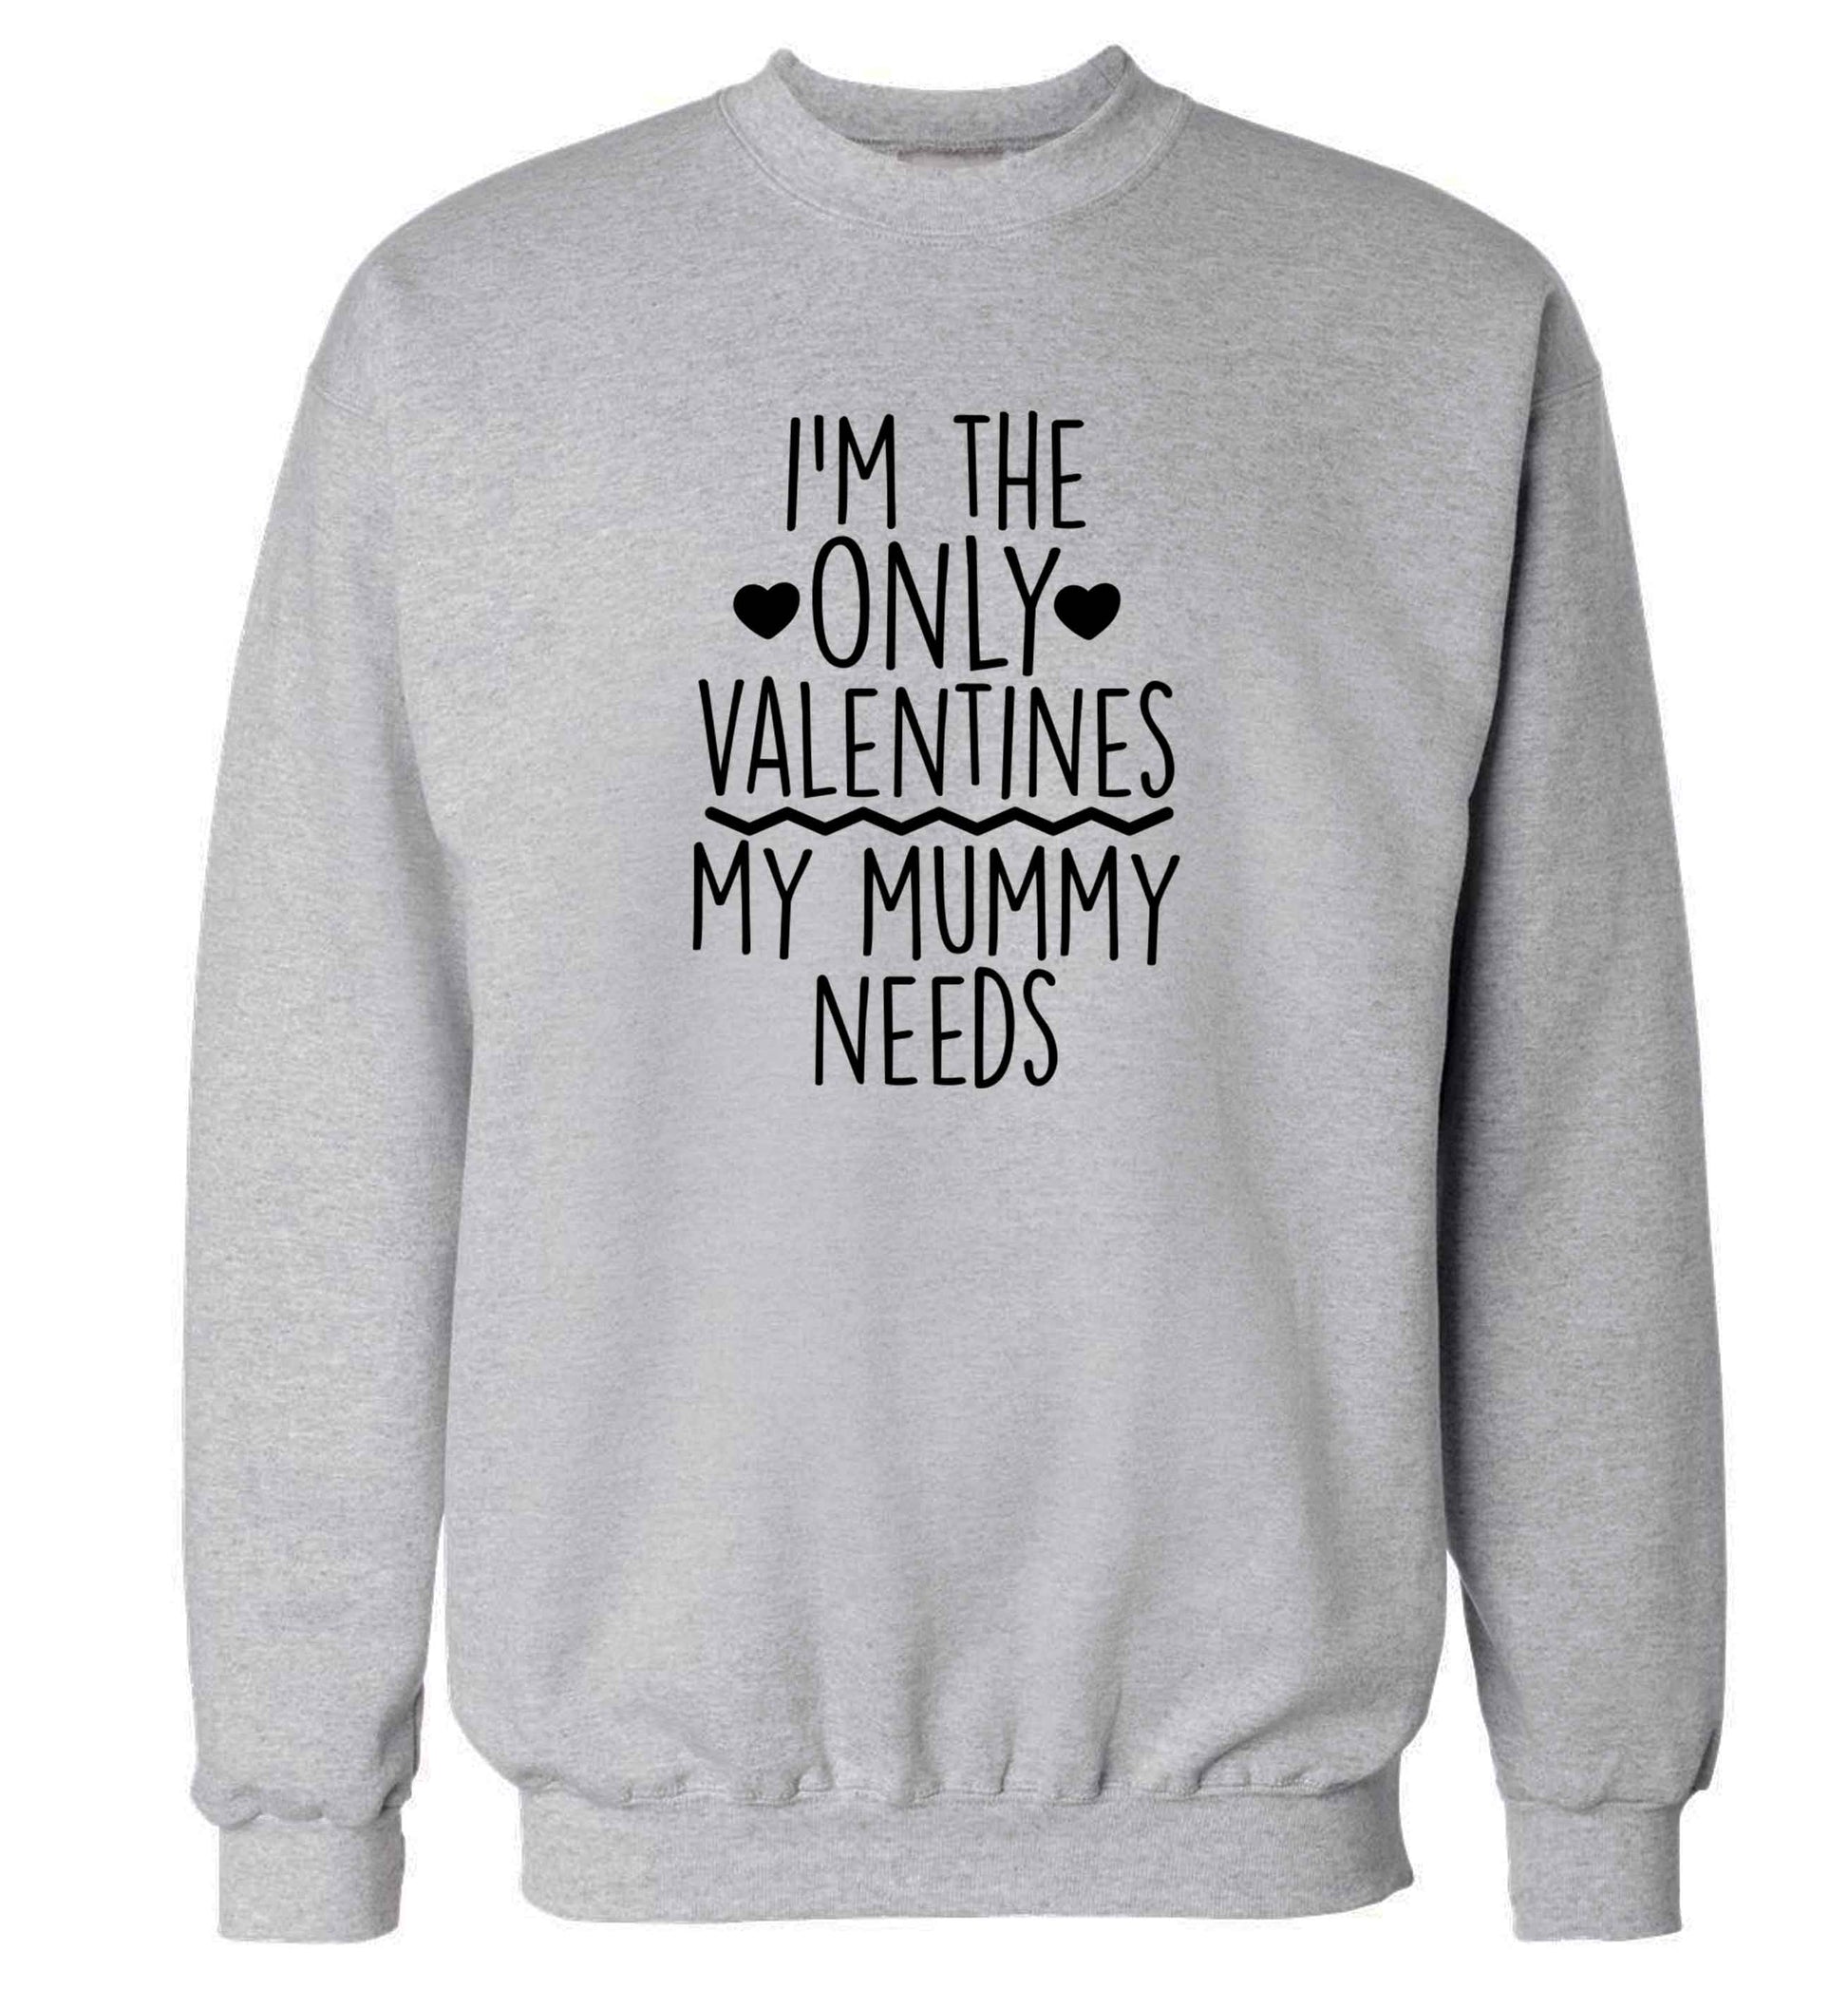 I'm the only valentines my mummy needs adult's unisex grey sweater 2XL